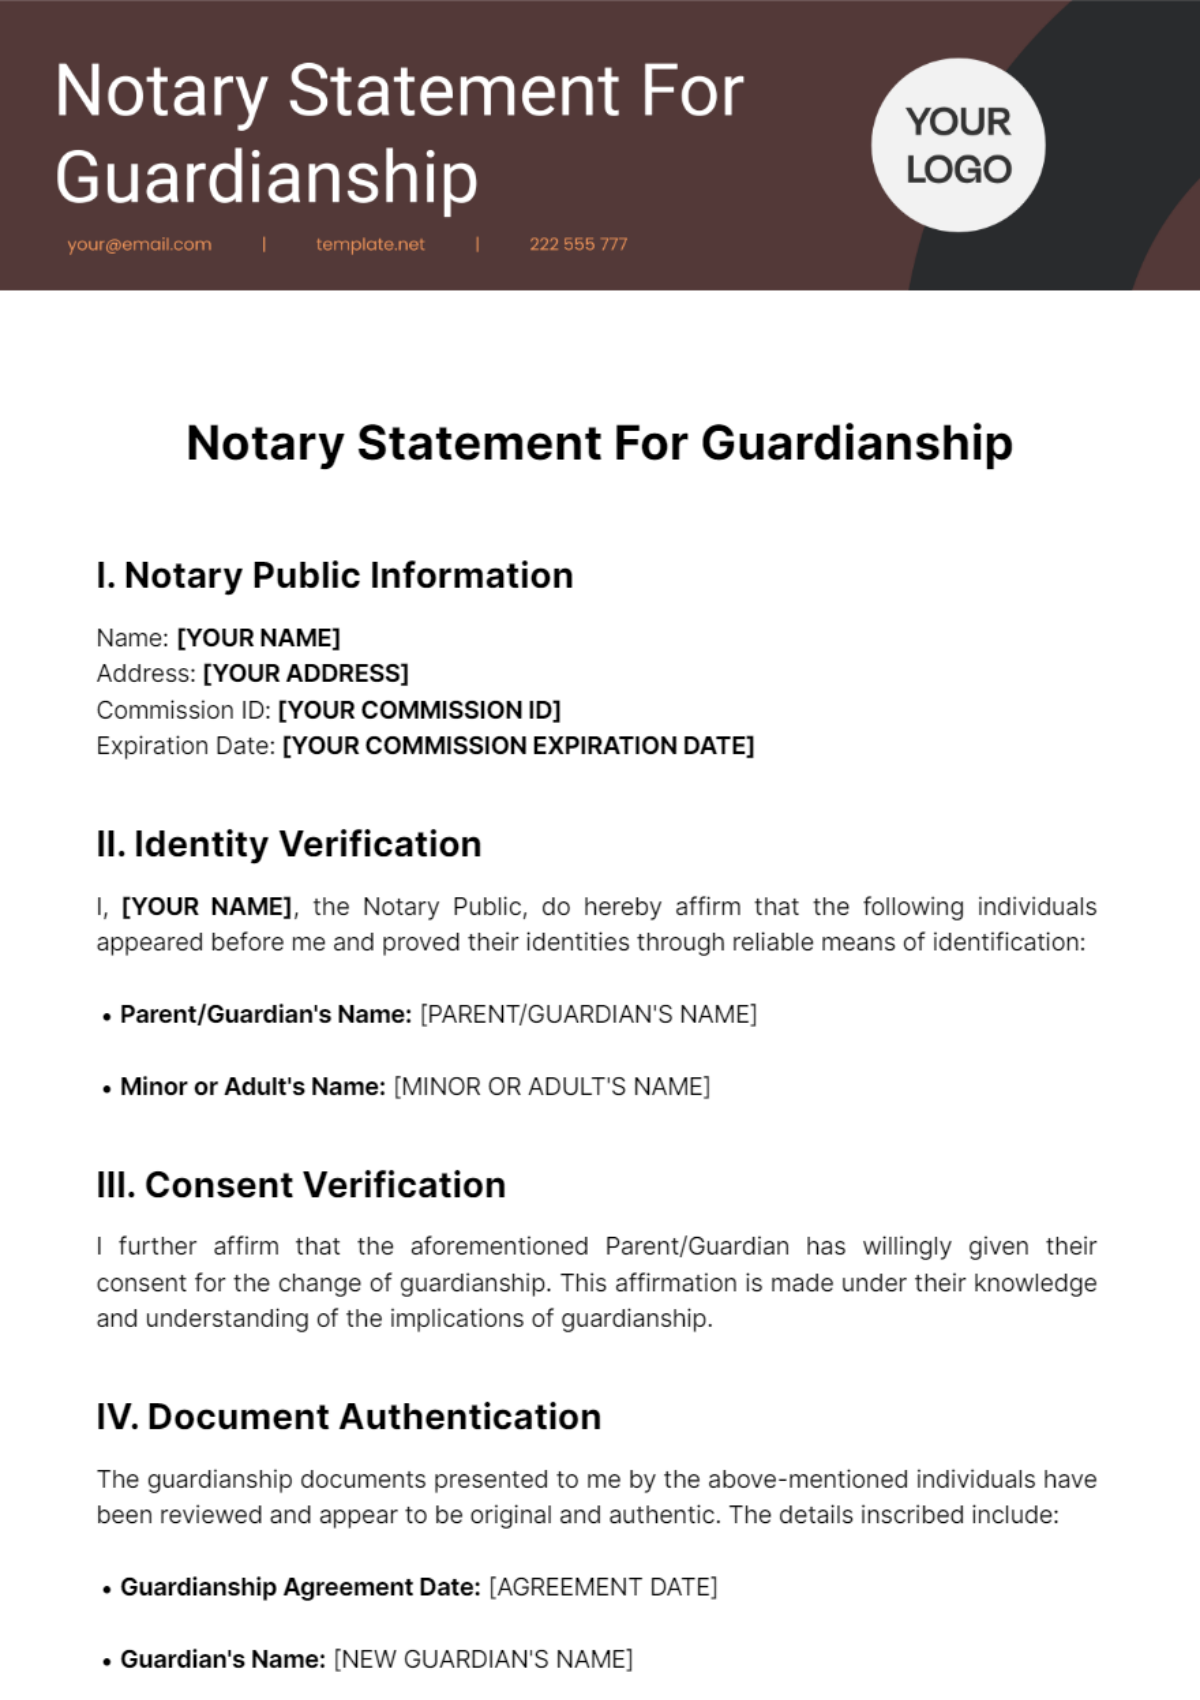 Notary Statement For Guardianship Template